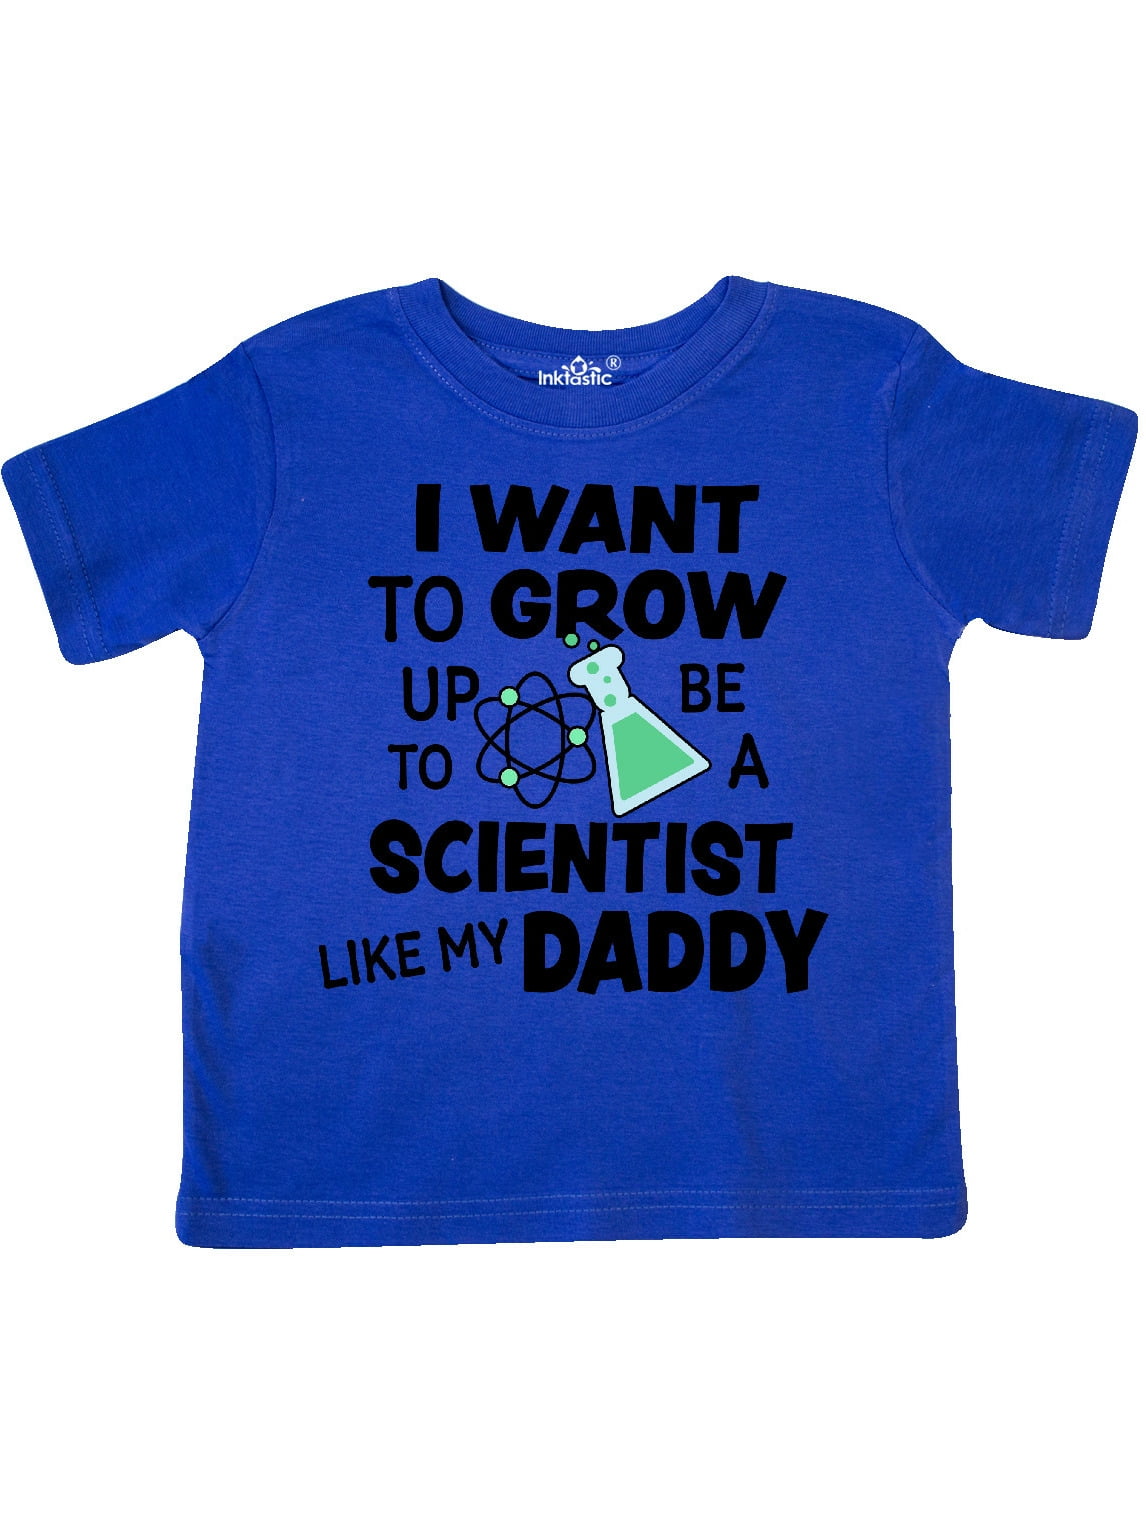 When I Grow Up I Want to be a Scientist Just Like My Daddy kids short sleeve t-s 